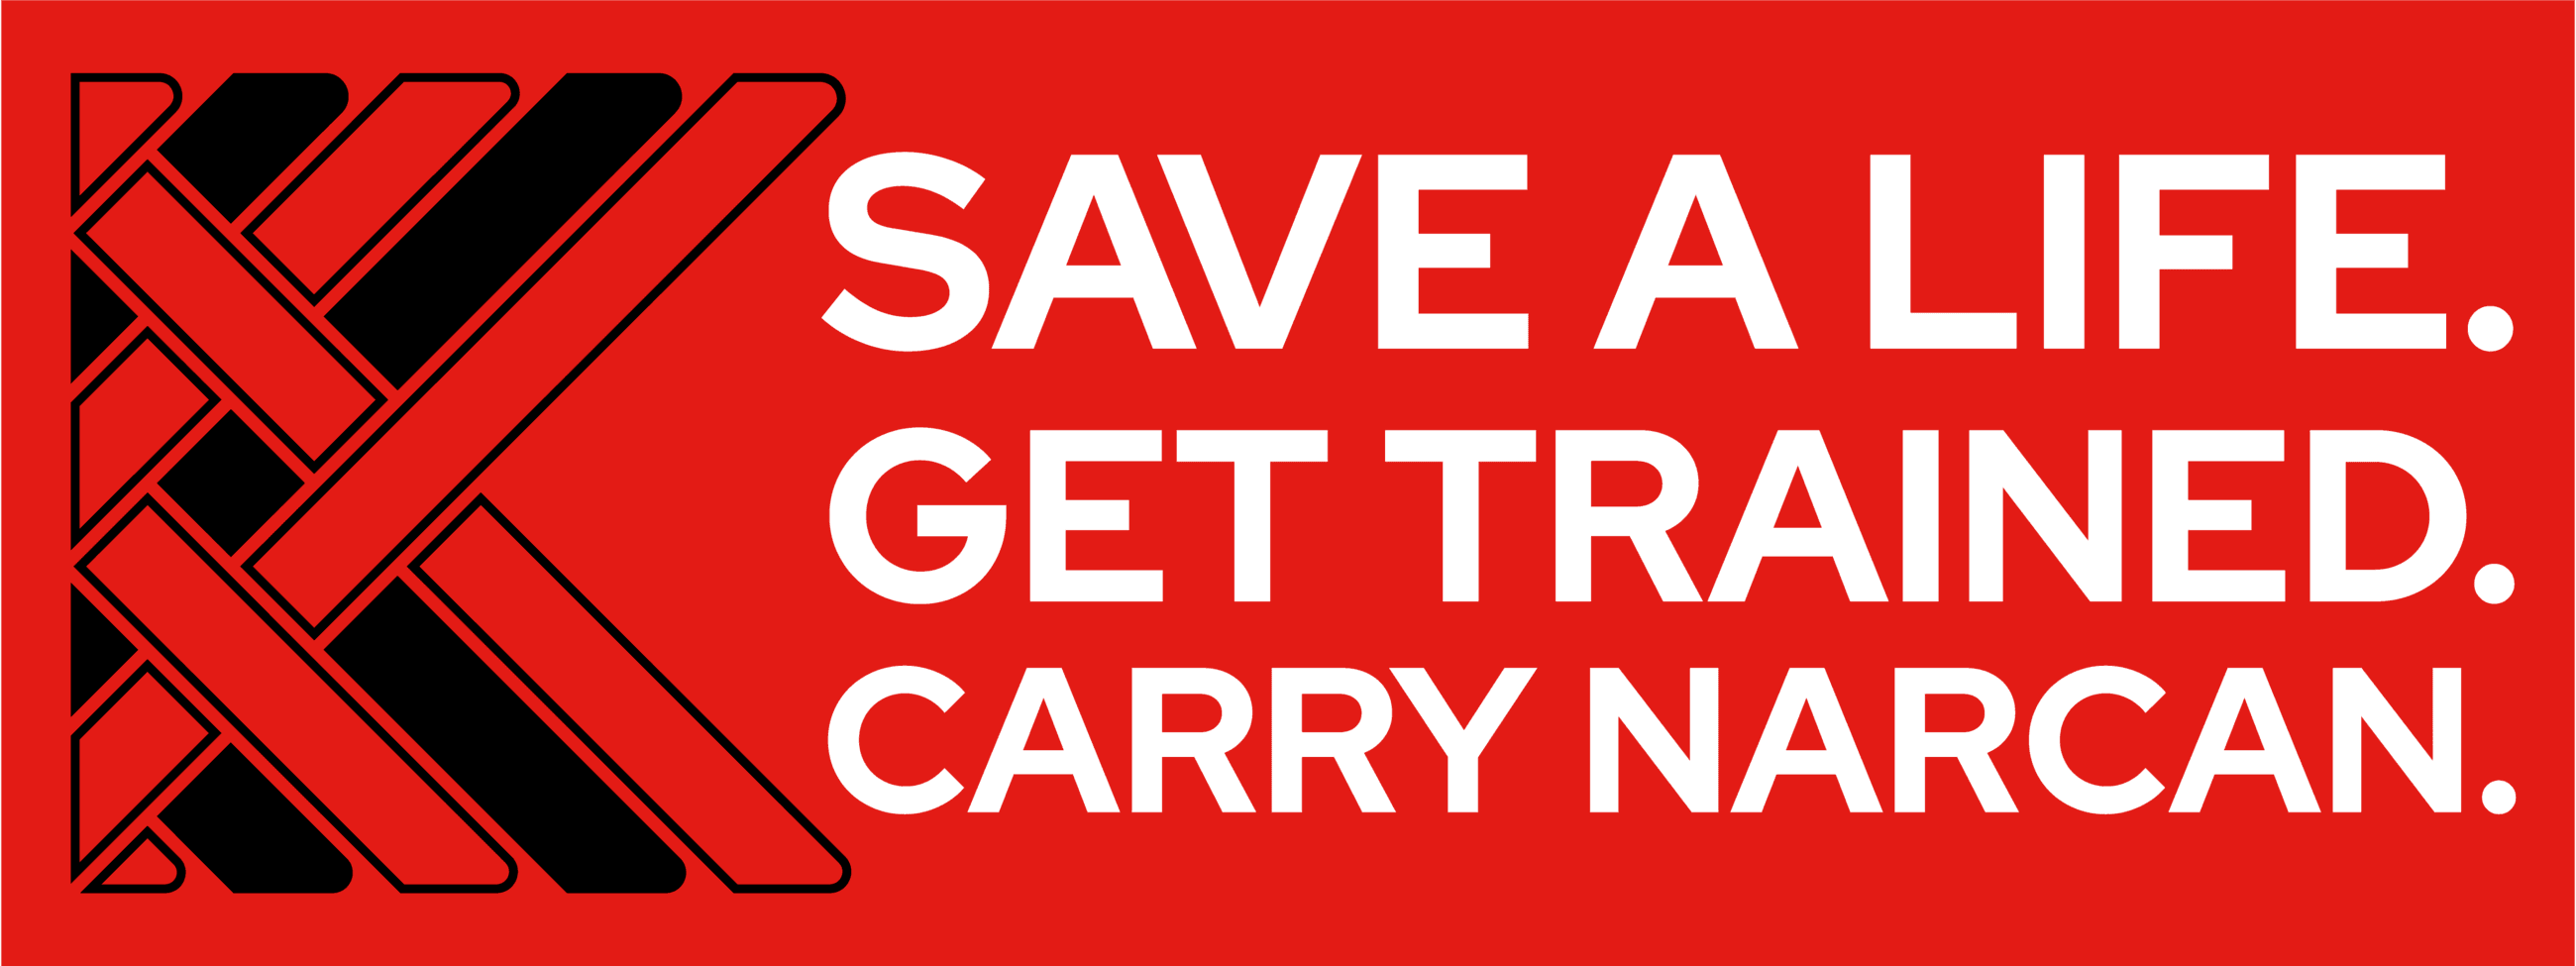 Save a life. Get trained. Carry Narcan. (Kenosha County Public Health)